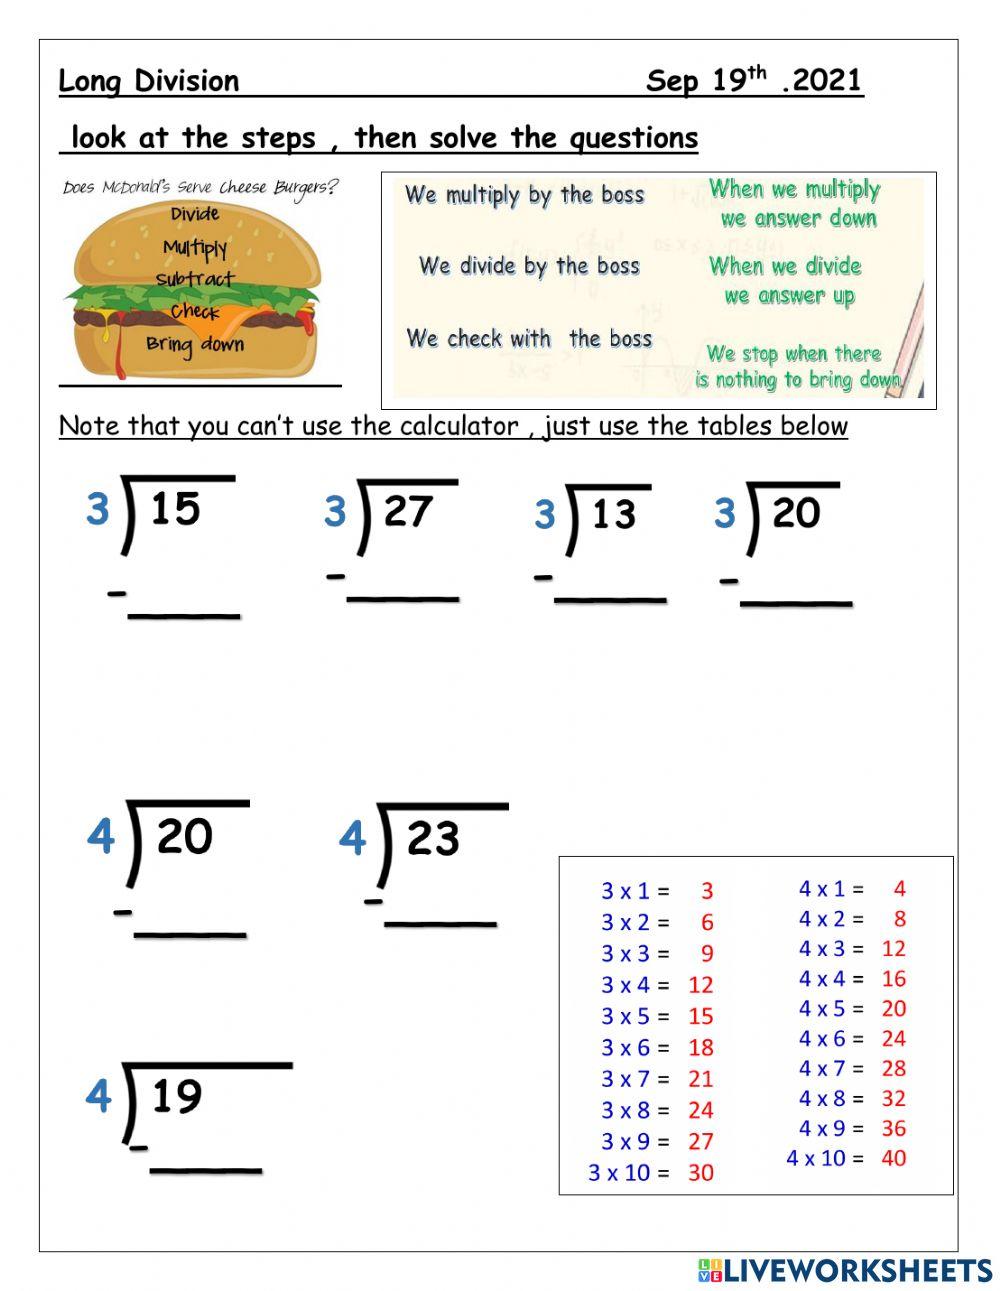 Long division differentiation